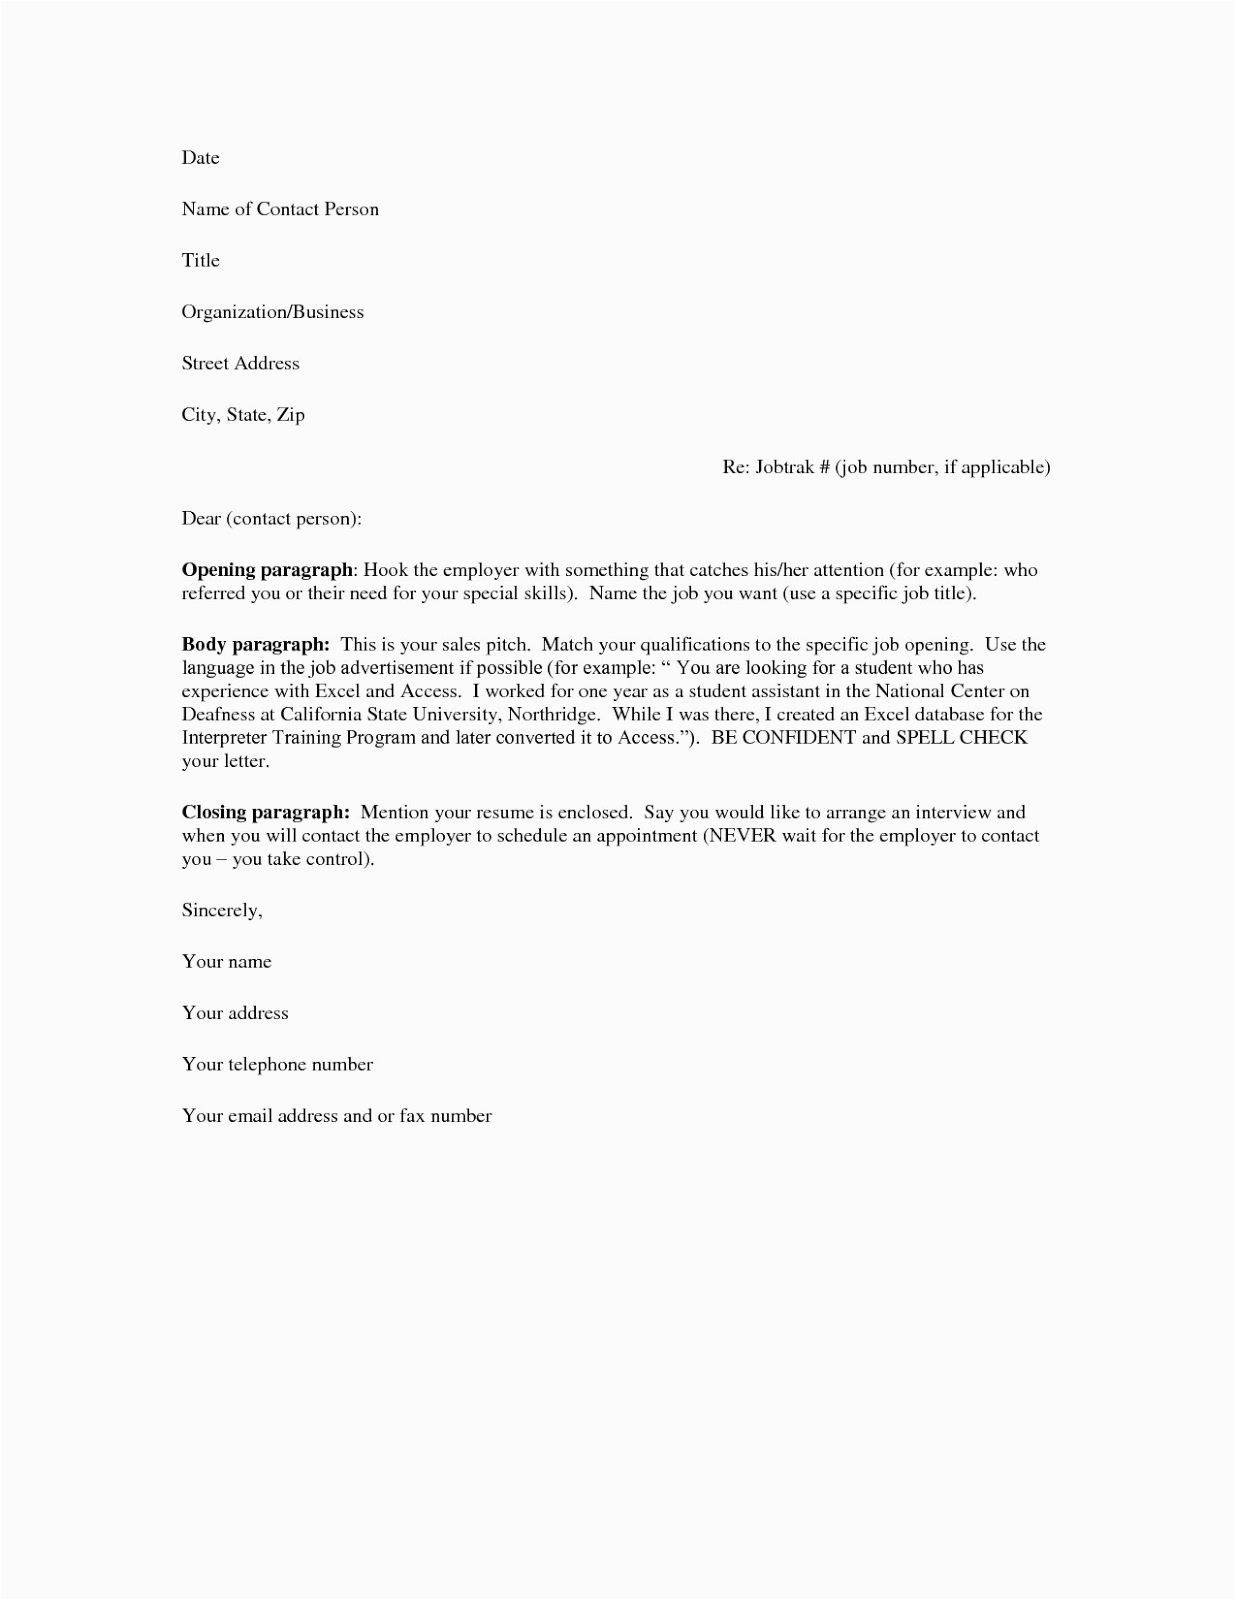 Free Download Sample Cover Letter for Resume Free Cover Letter Samples for Resumes Sample Resume